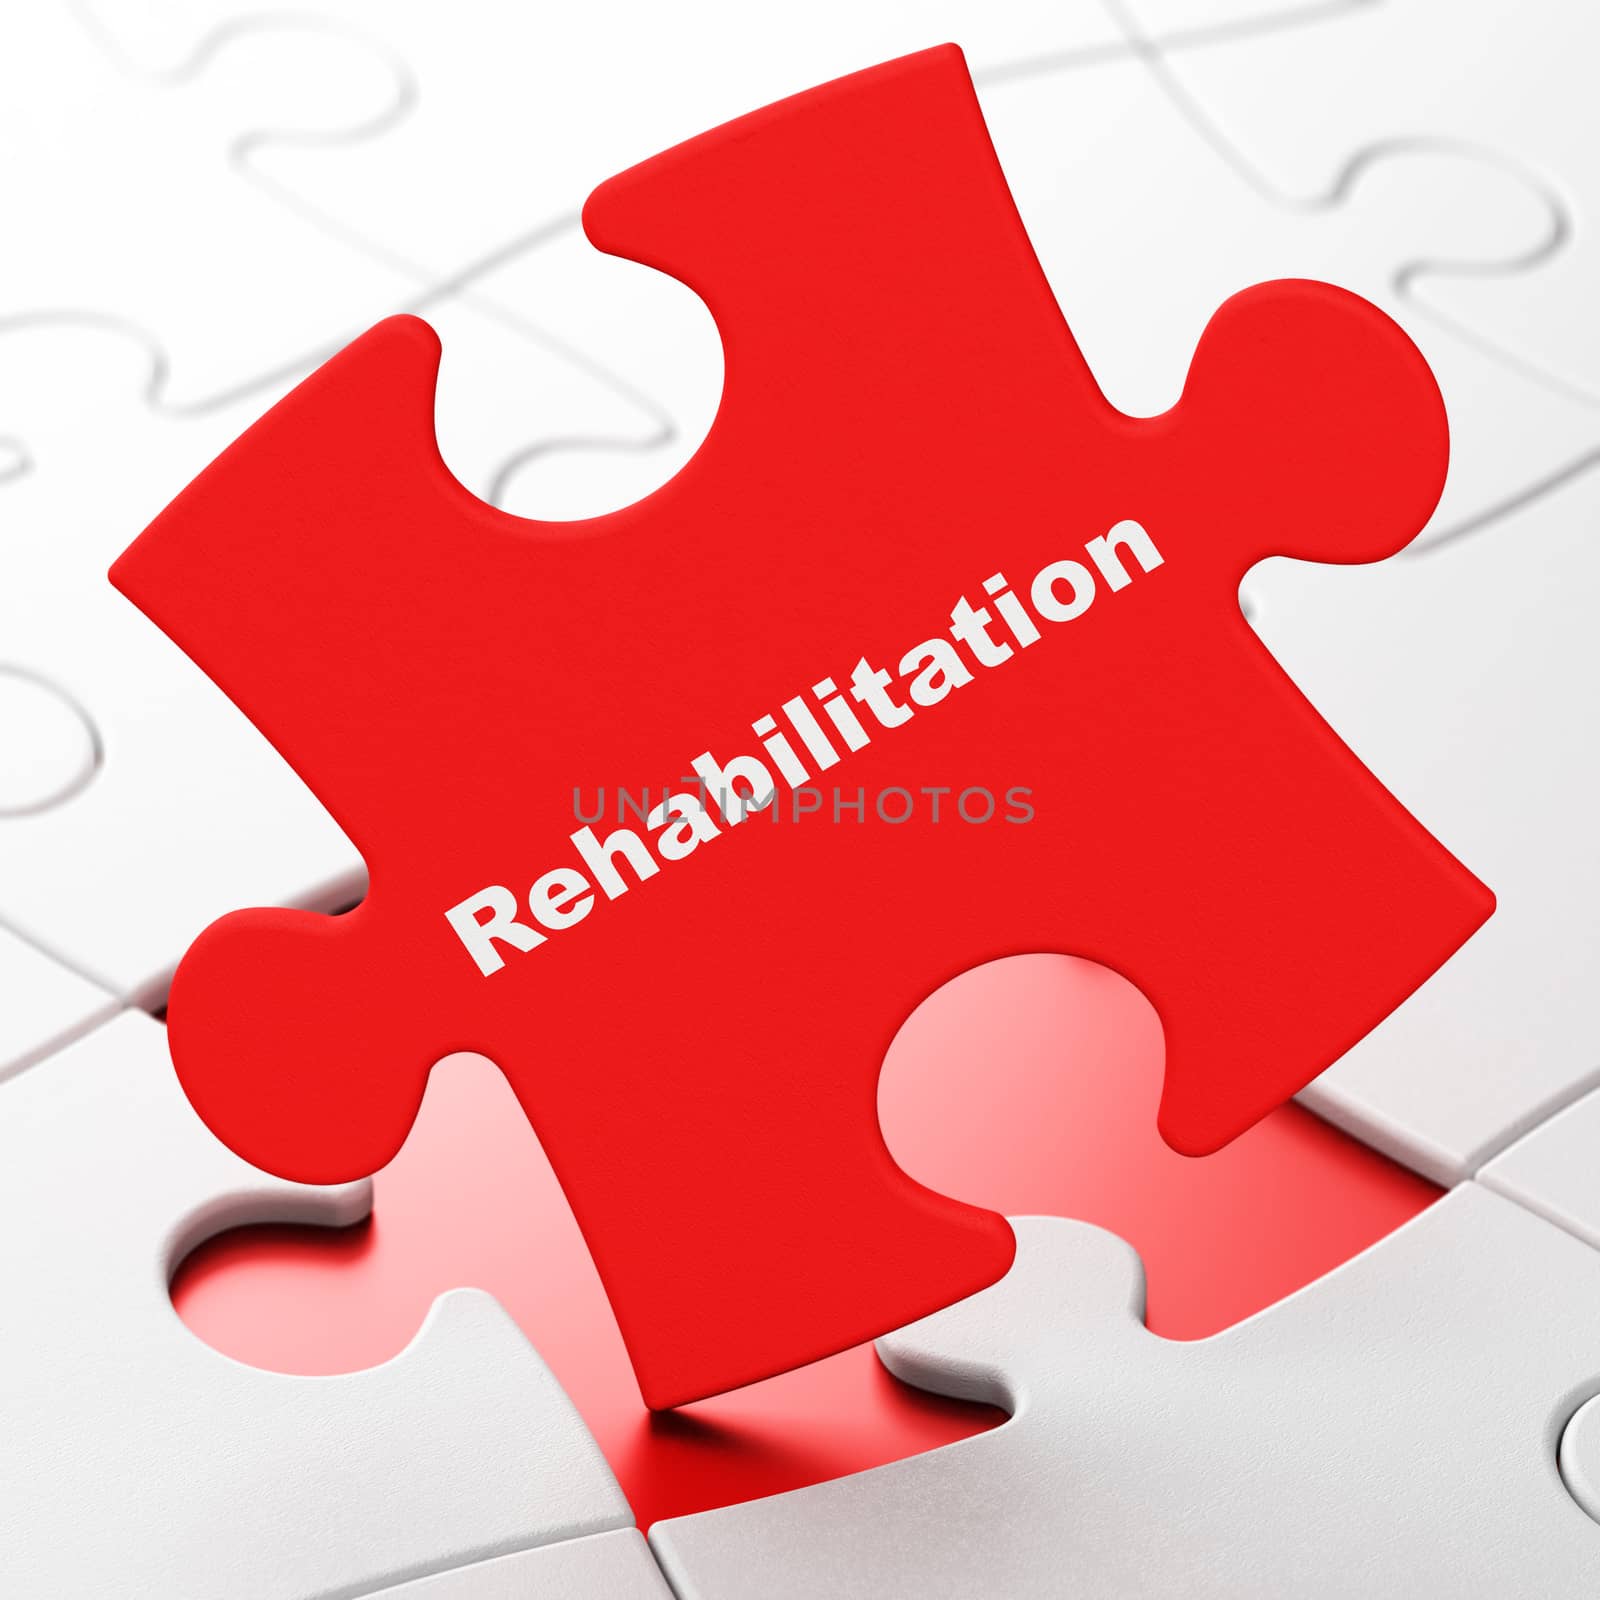 Healthcare concept: Rehabilitation on Red puzzle pieces background, 3D rendering